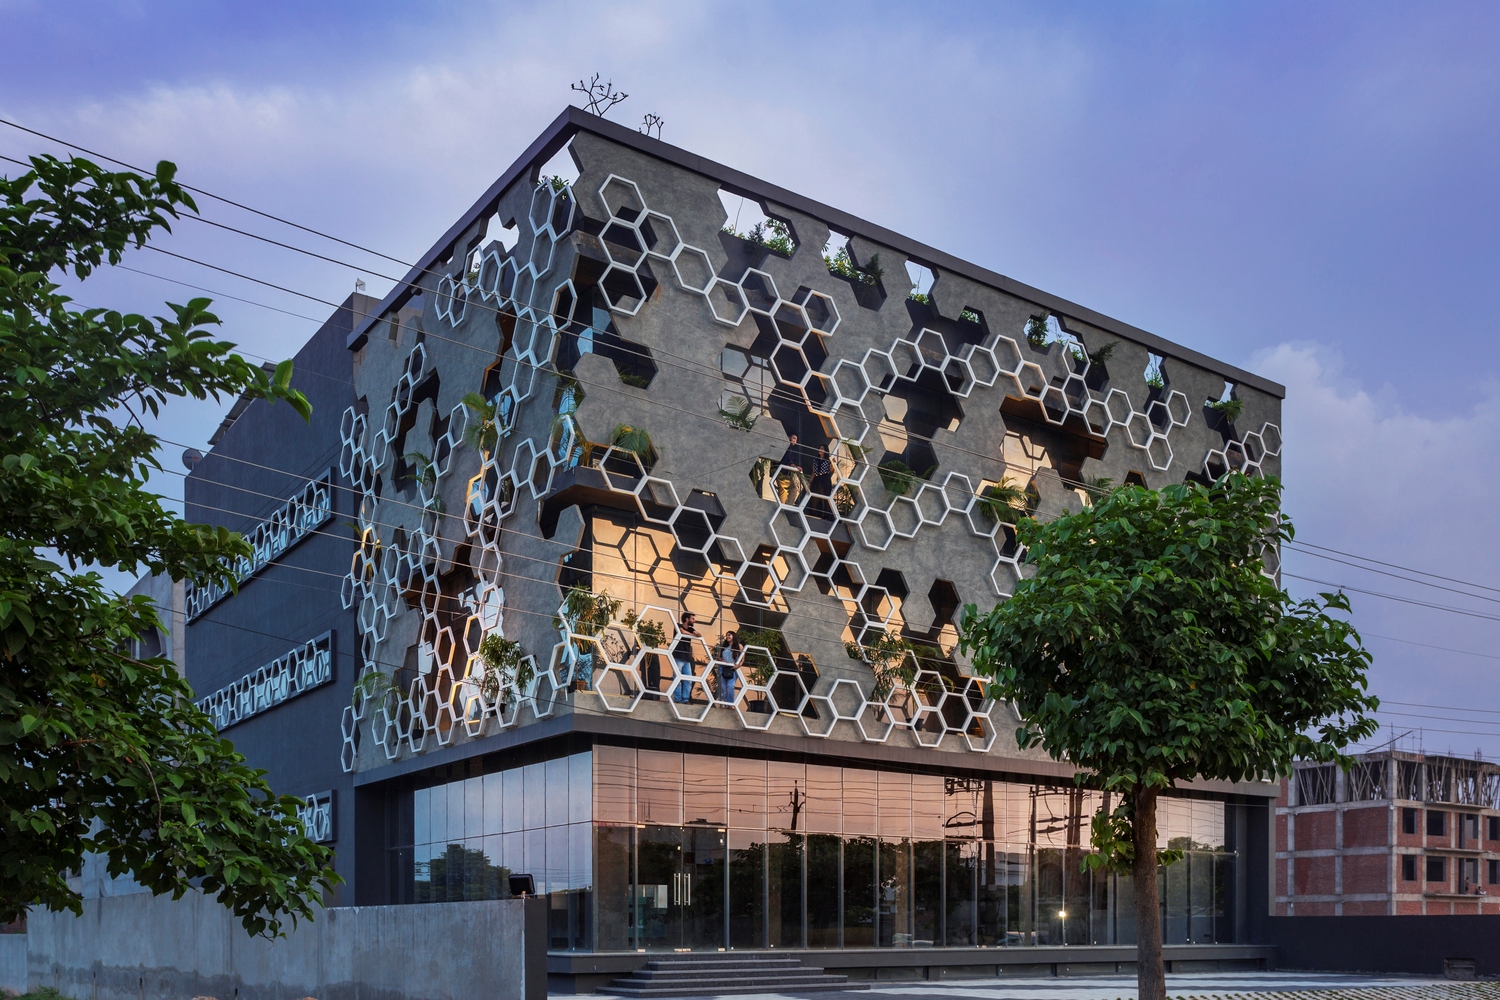 Hexalace Office Building by Studio Ardete features a hexagonal patterned  facade - Livin Spaces